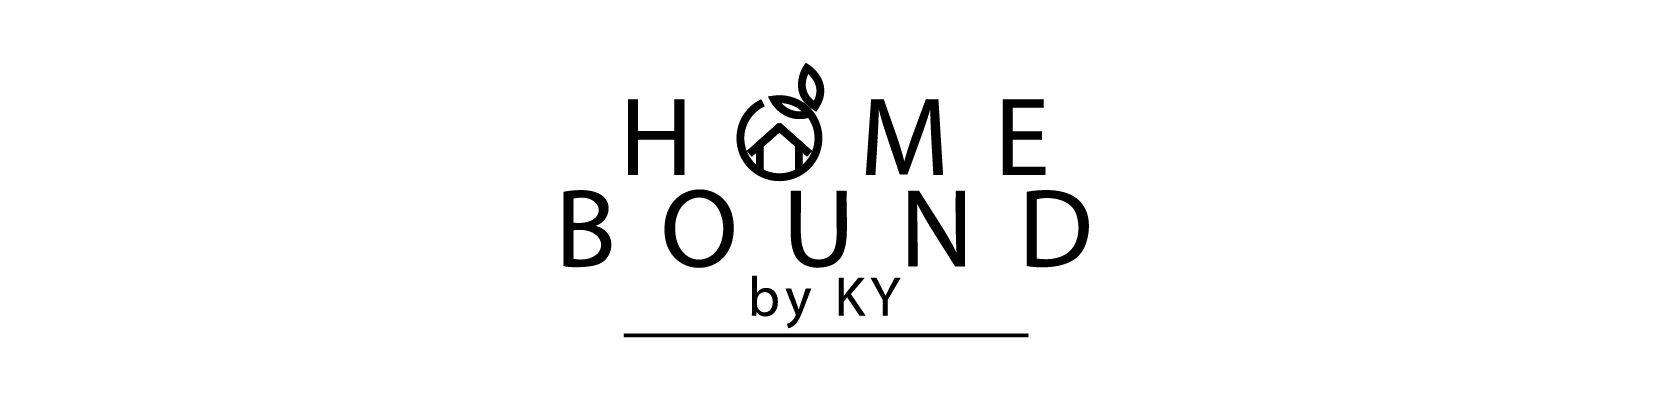 HomeBound by KY